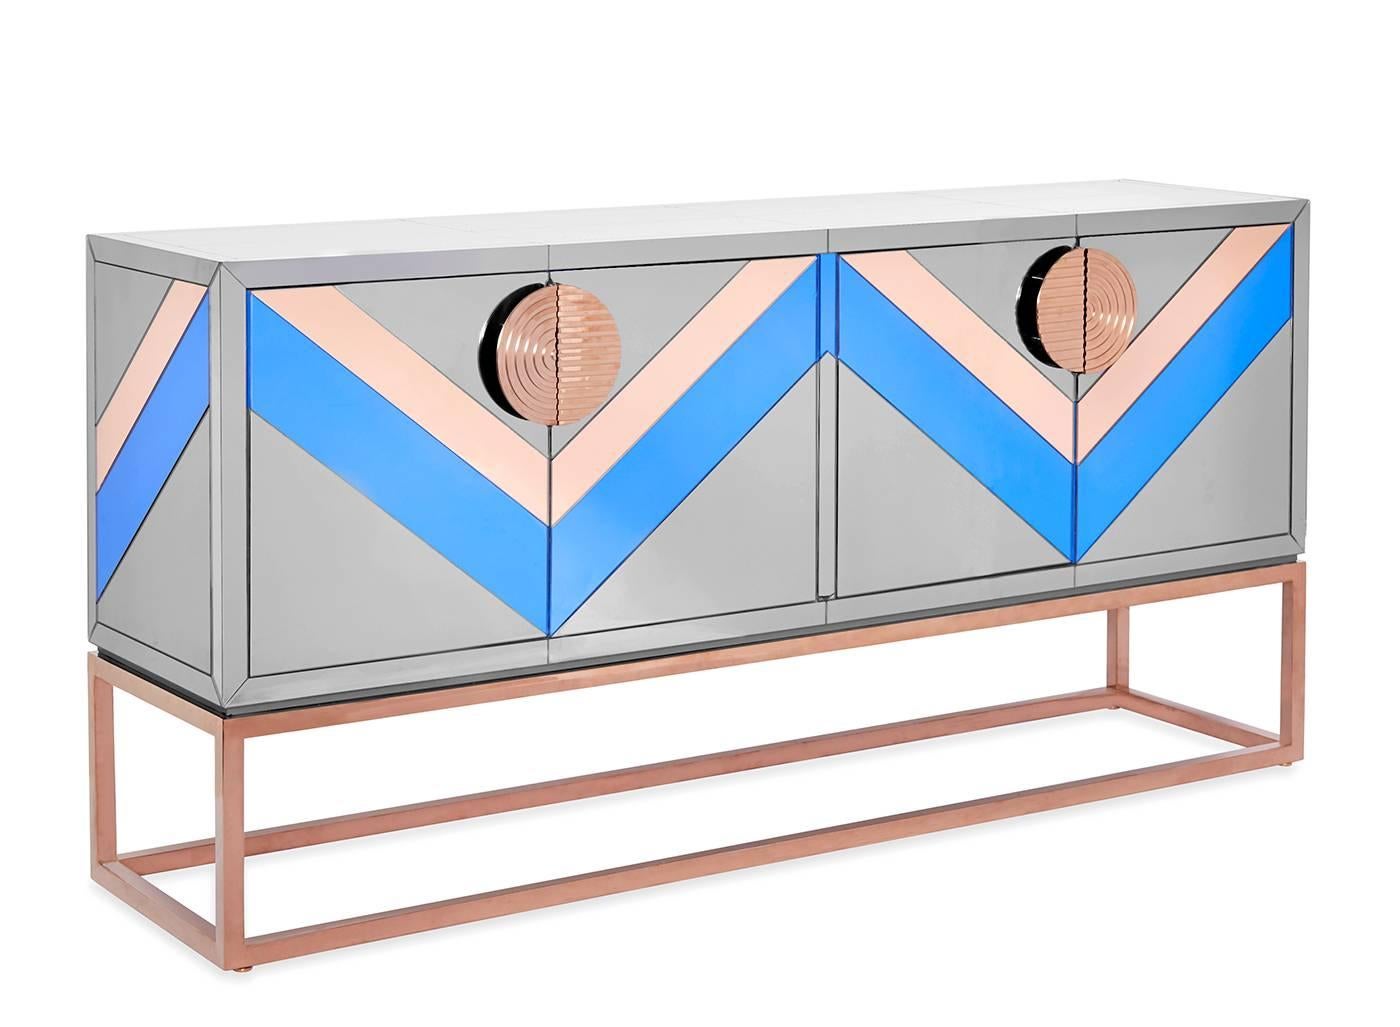 Avant antique. With a nod to Neo-Memphis style and a wink of Modern American Glamour, consider this the credenza gone cutting edge. Our Nouvelle credenza features a mirrored case in tones of smoke, cobalt, and copper perched on a minimalist cube